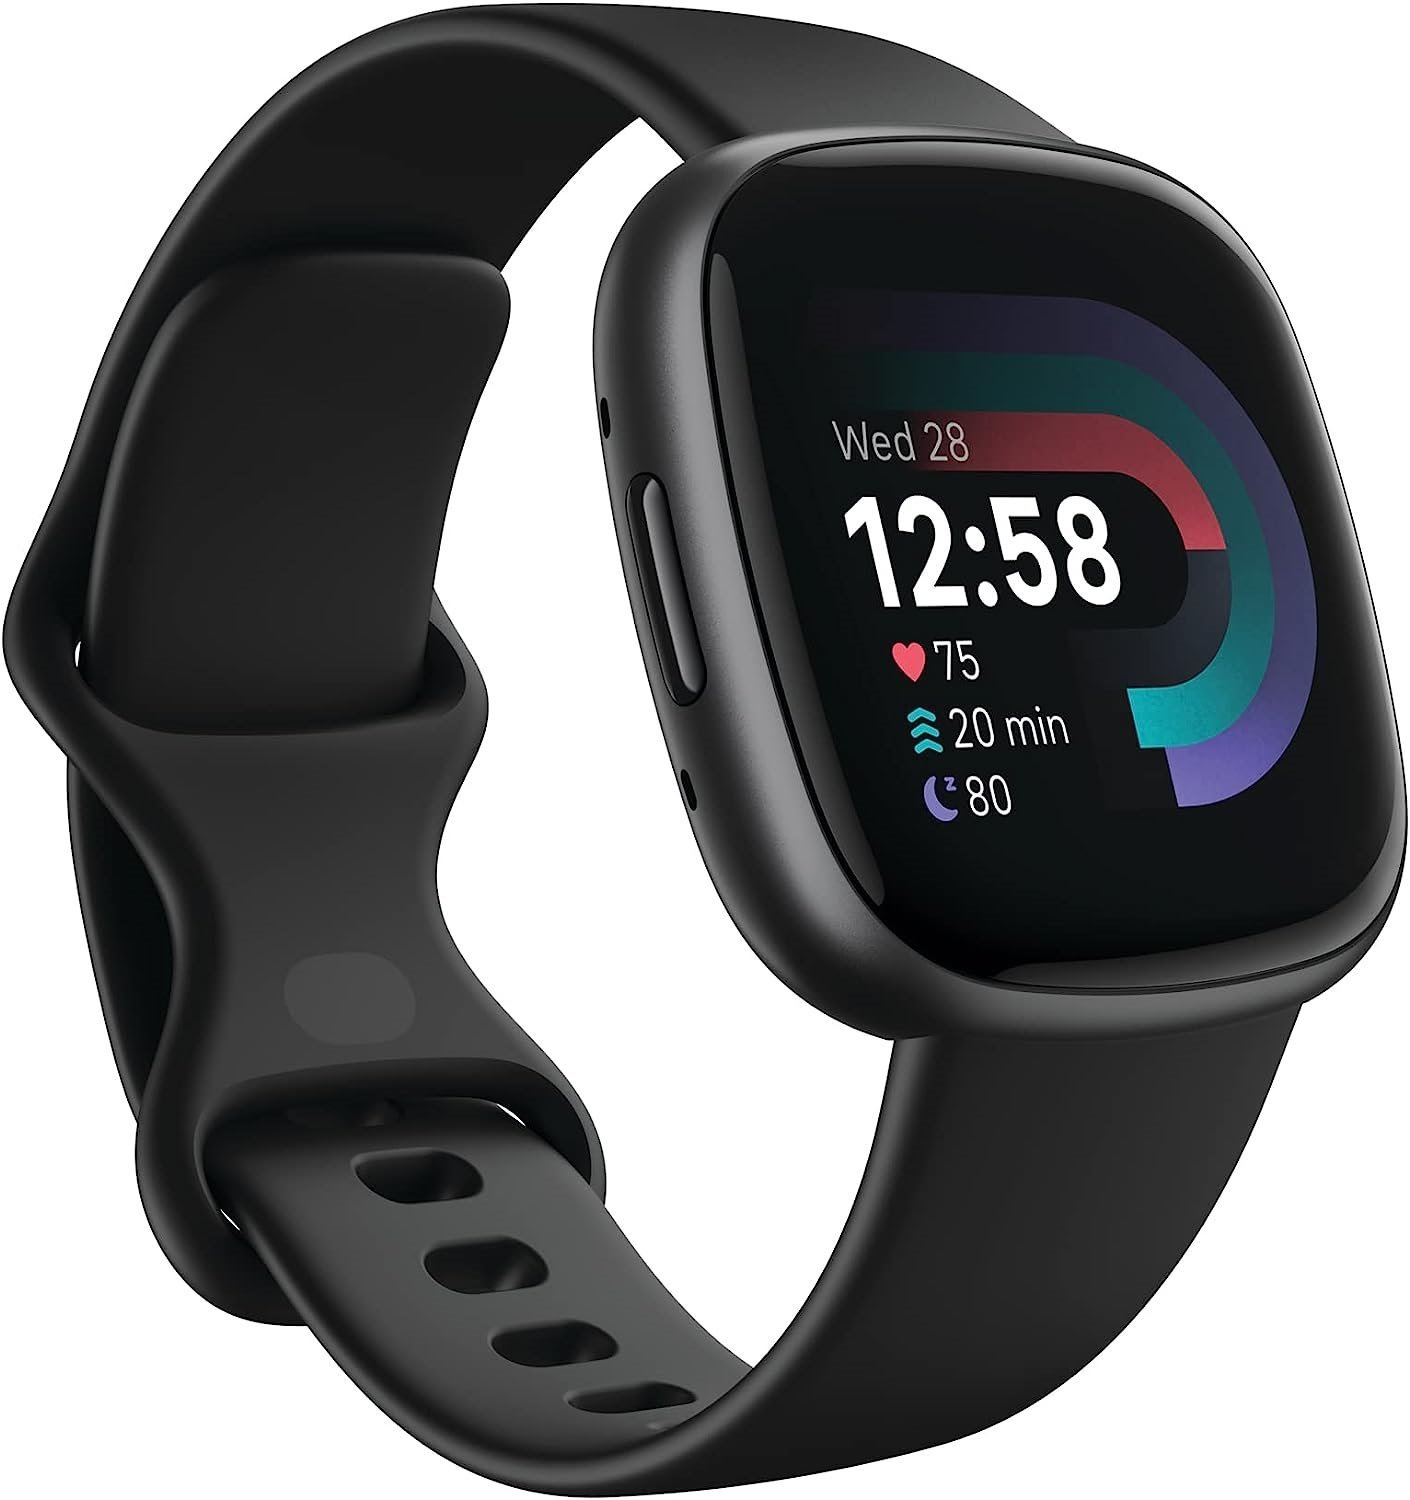 Fitbit Versa 4 Fitness Smart Watch - Daily Readiness, Gps, 24/7 Heart Rate, 40+ Exercise Modes, Sleep Tracking and More, Black/graphite, One Size (S and L Bands Included)